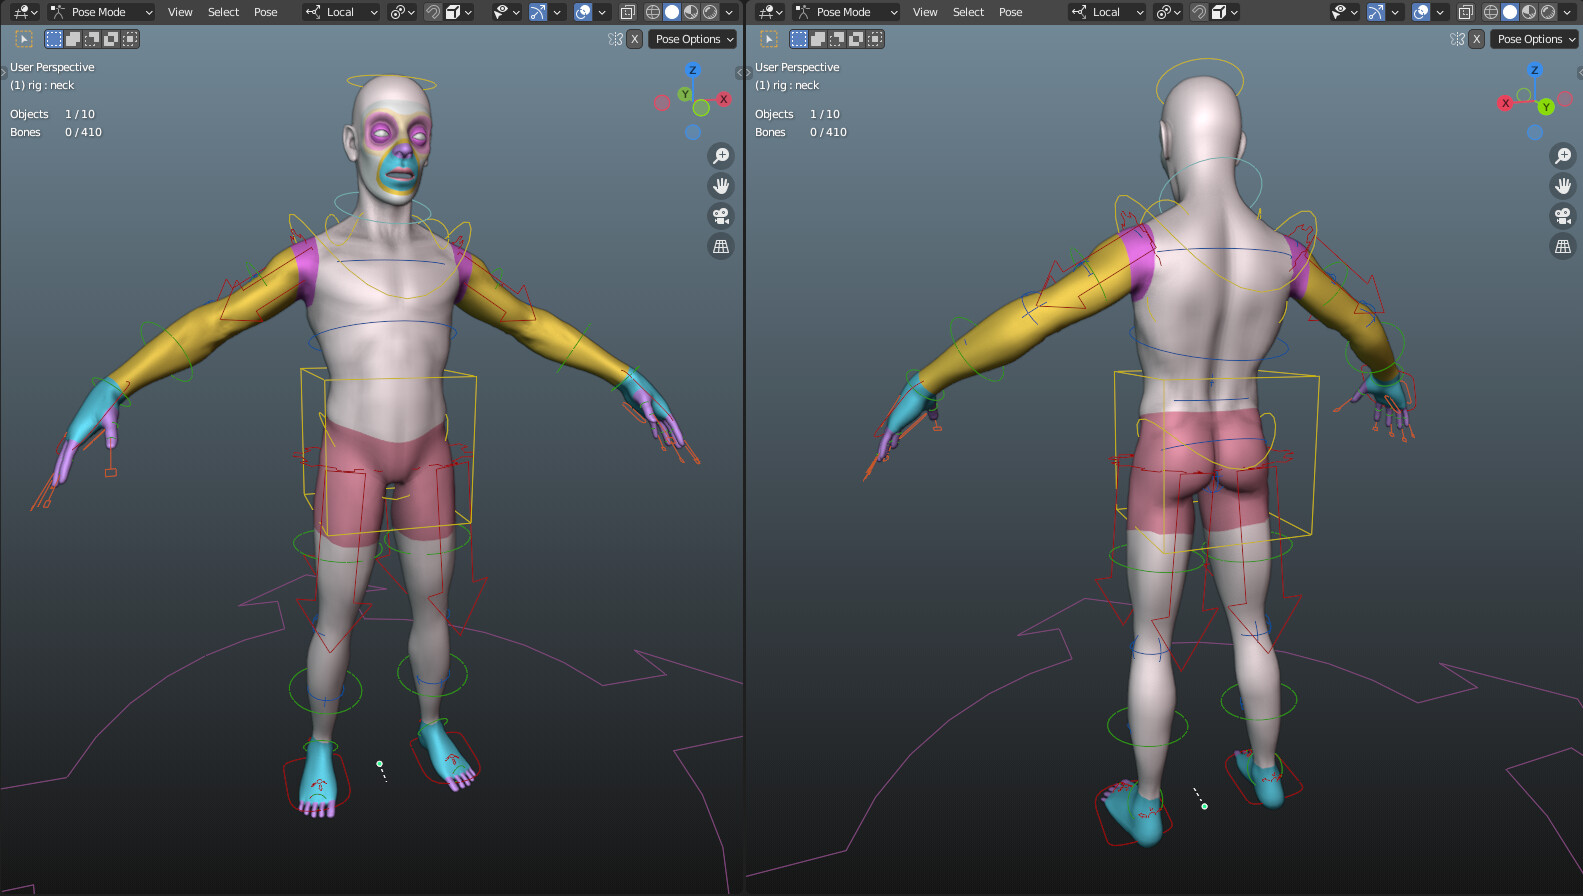 The rig was setup with Rigify which is an automation tool in Blender. This is done by creating a skeletal system placing each bone along the mesh, then Rigify will ref our setup to create all the bones and controls. Then we just bind the mesh to the rig. 